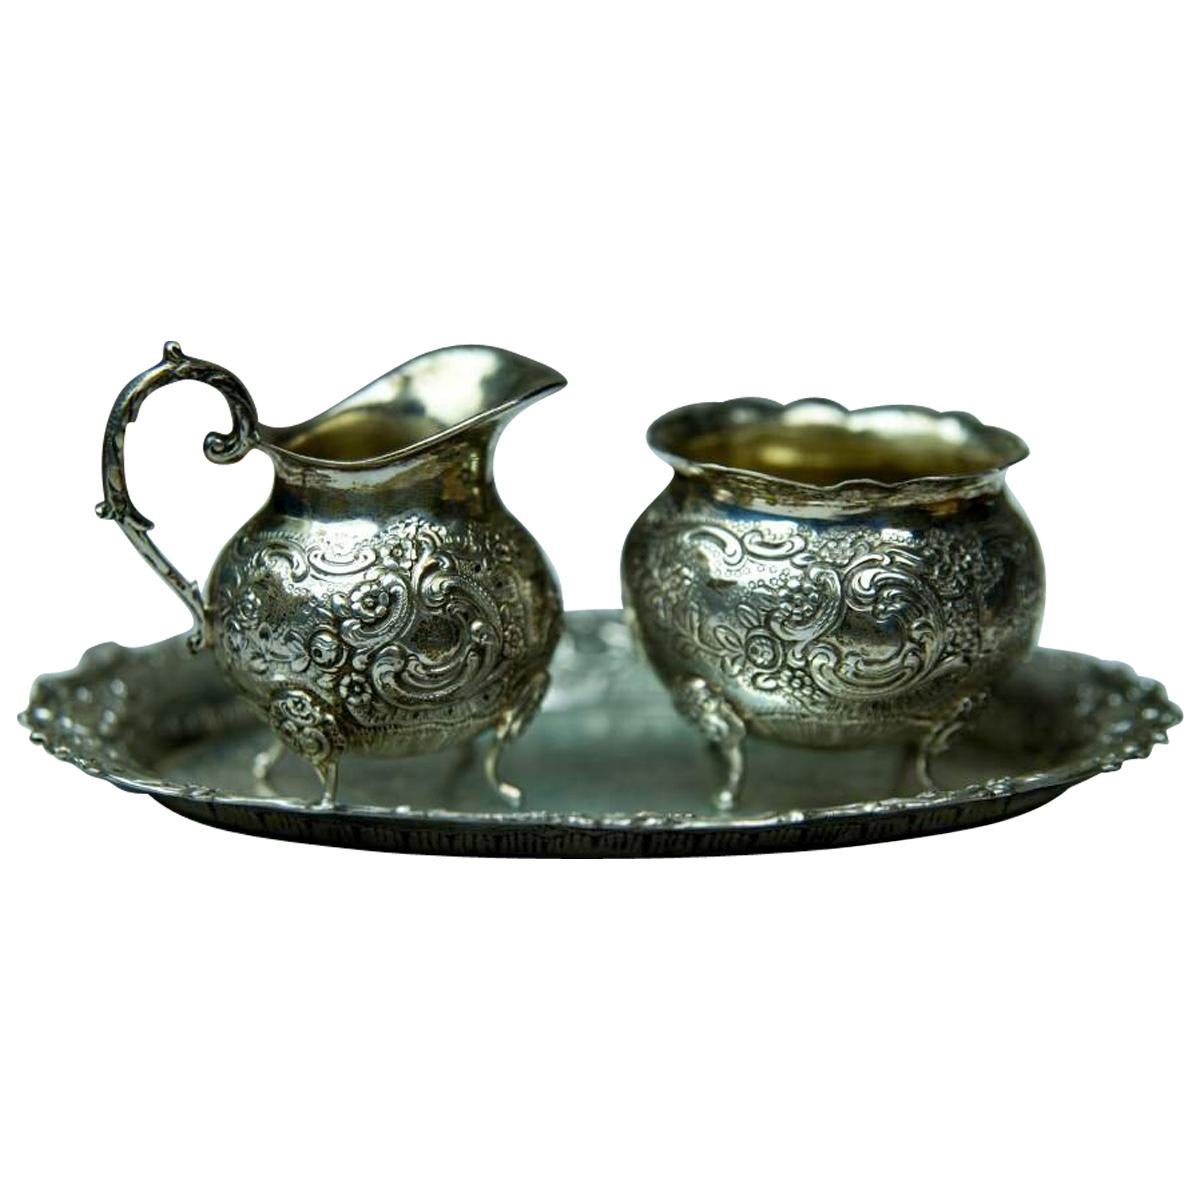 Set of Silver Vessels from the First Half of the 20th Century